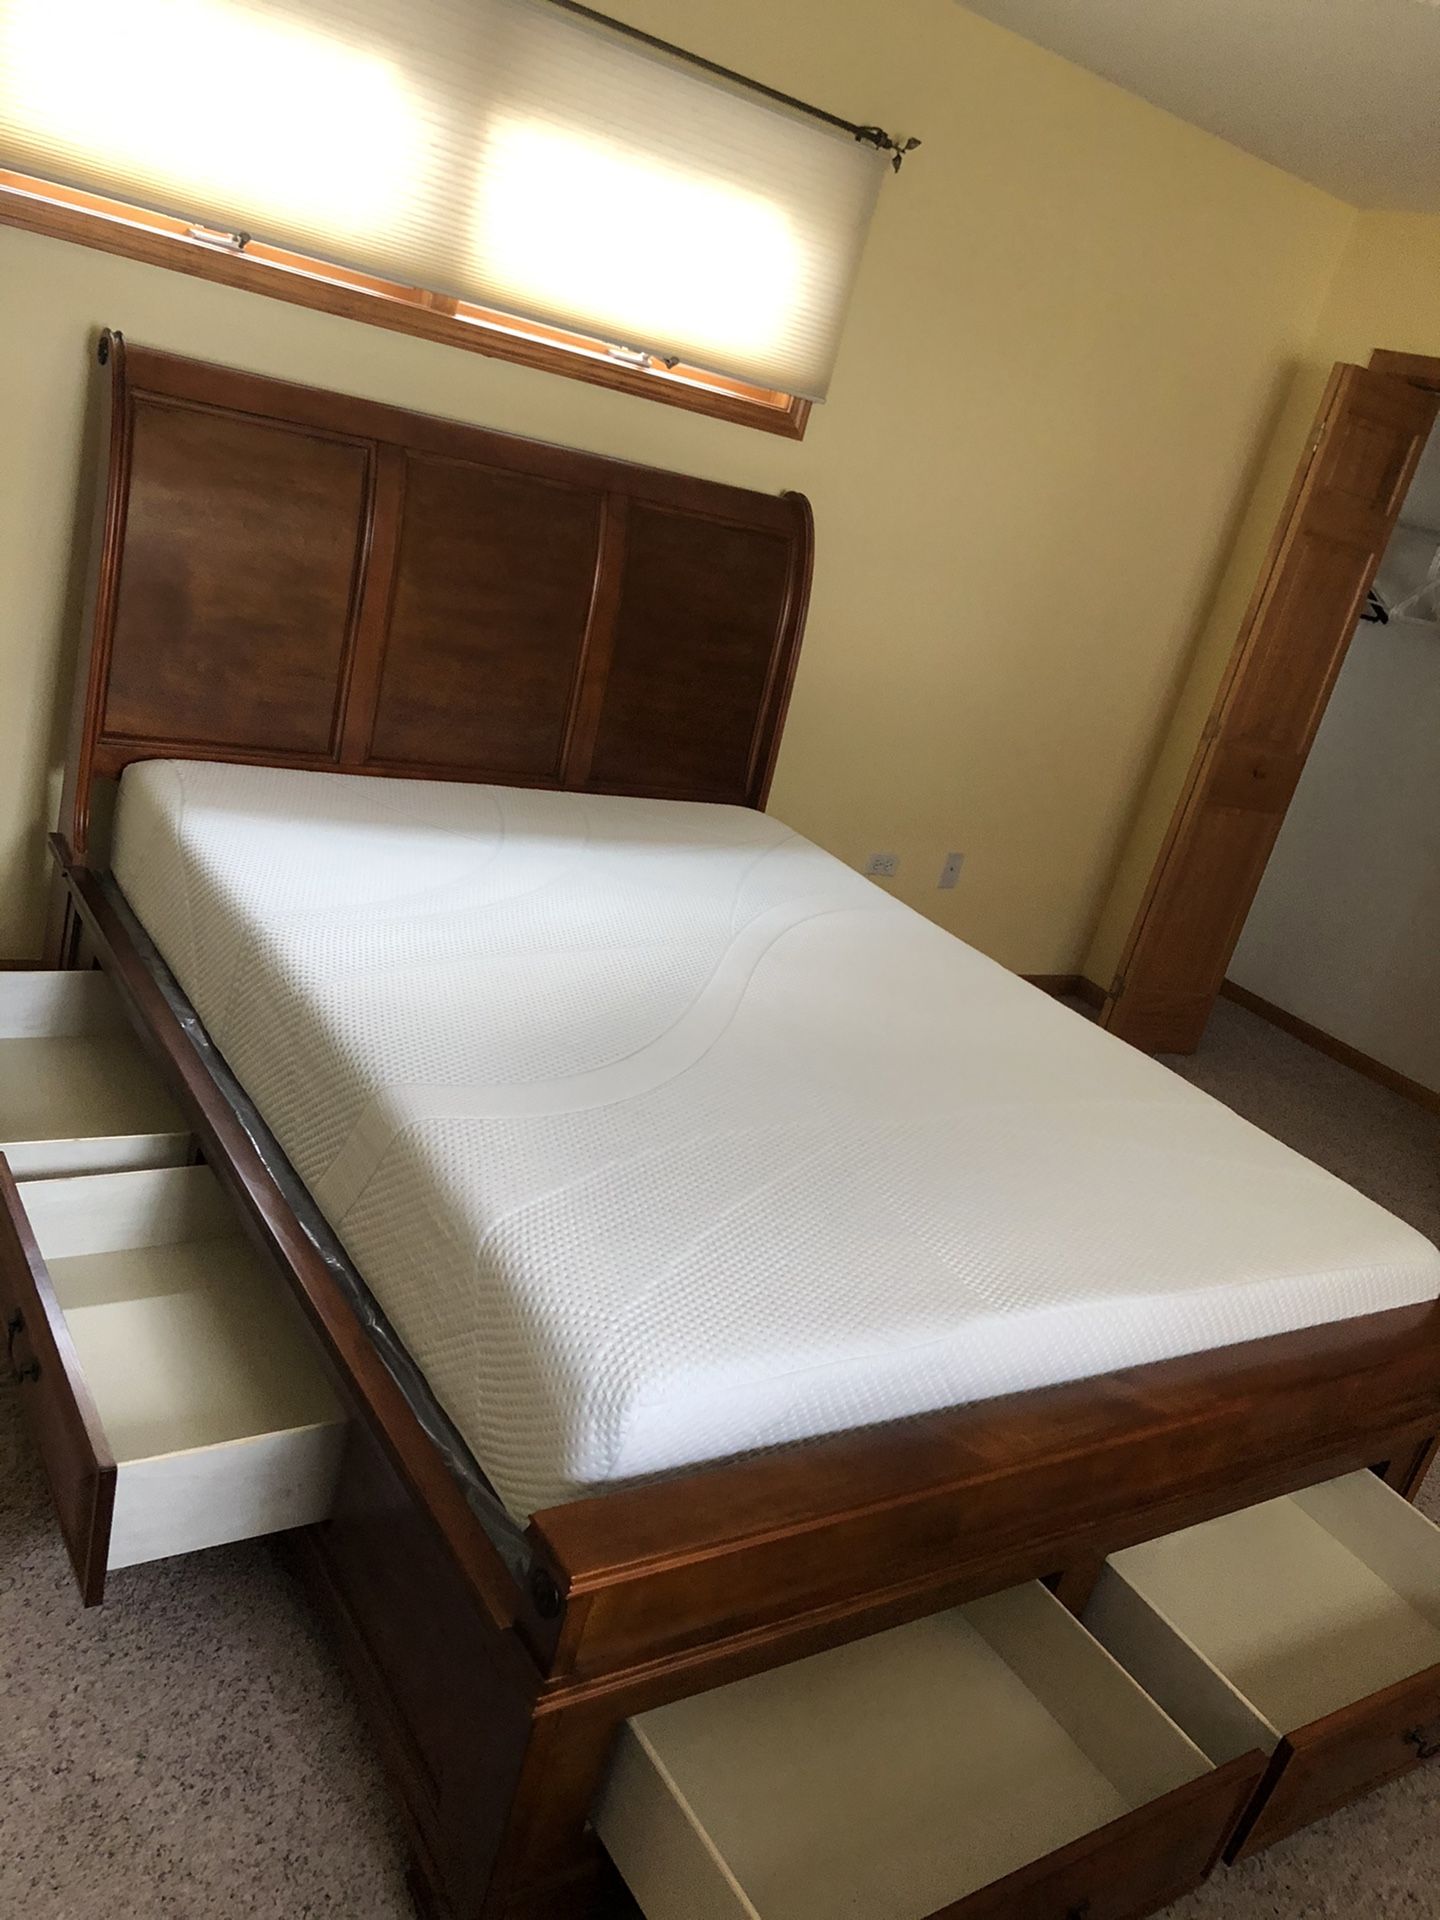 Queen bed frame and mattress with drawers in excellent conditions memory foam